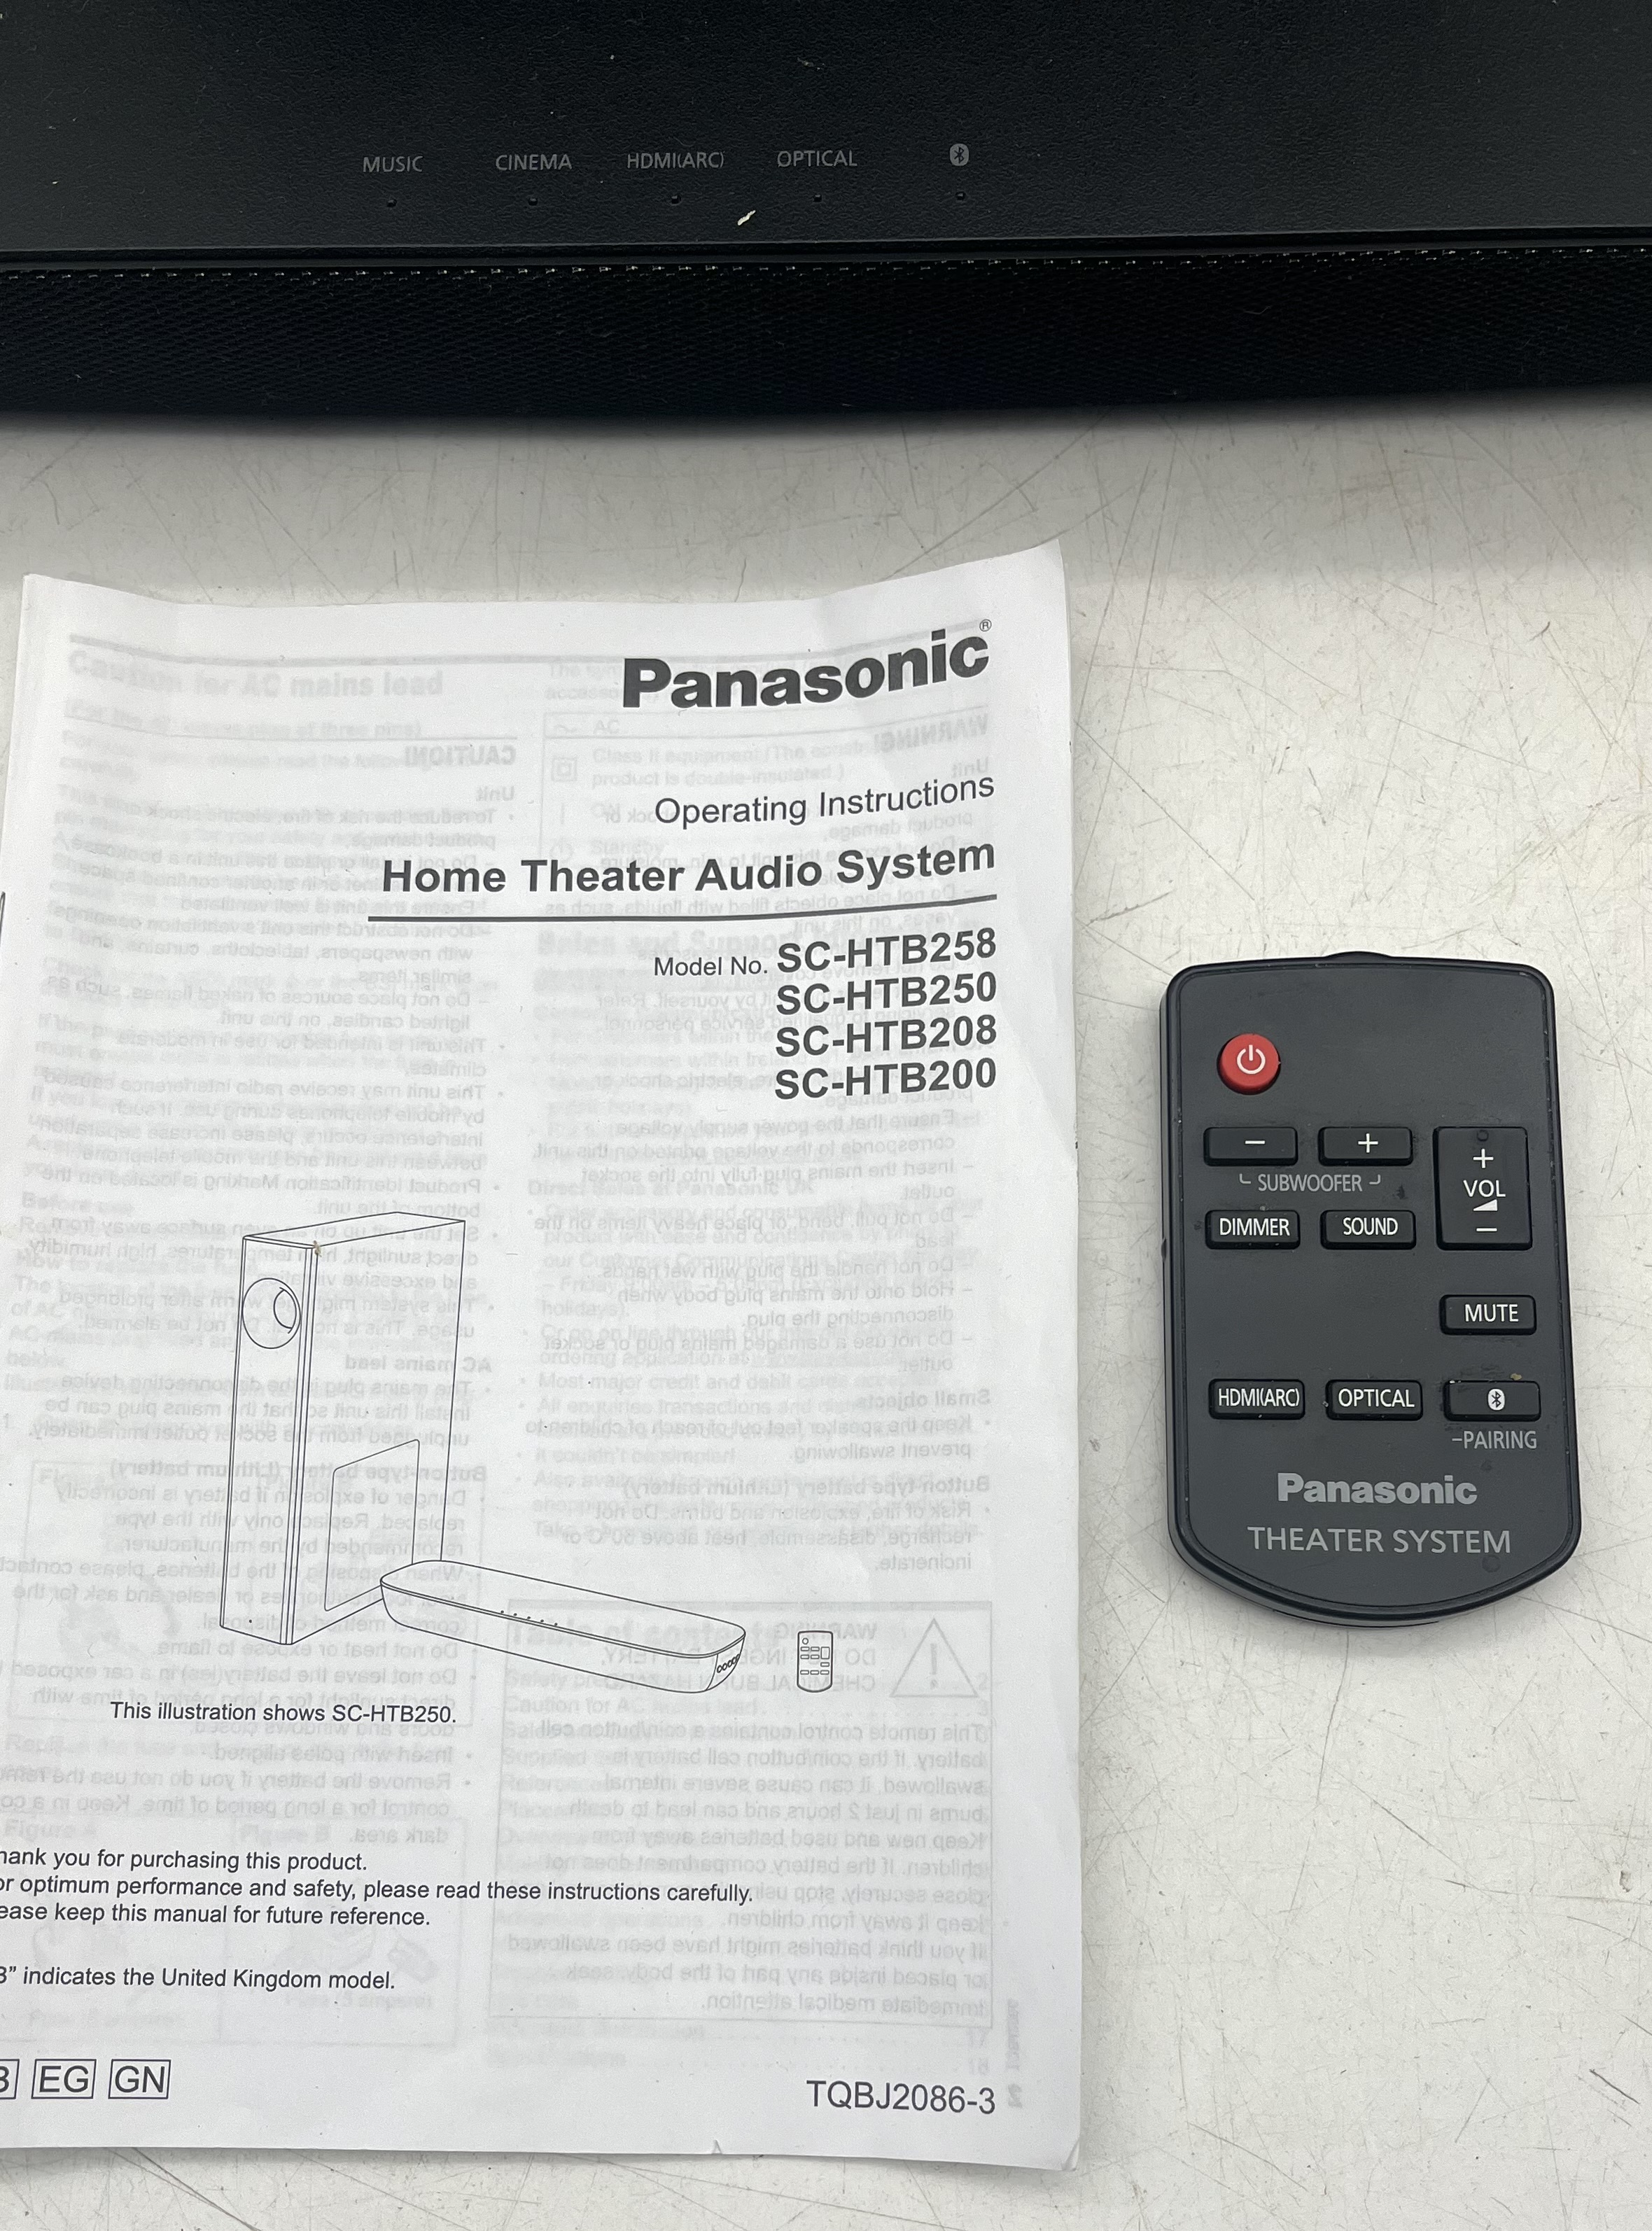 A Panasonic home theater audio system comprising an SU-HTB258 soundbar and an SB-HWA250 sub- woofer - Image 5 of 8